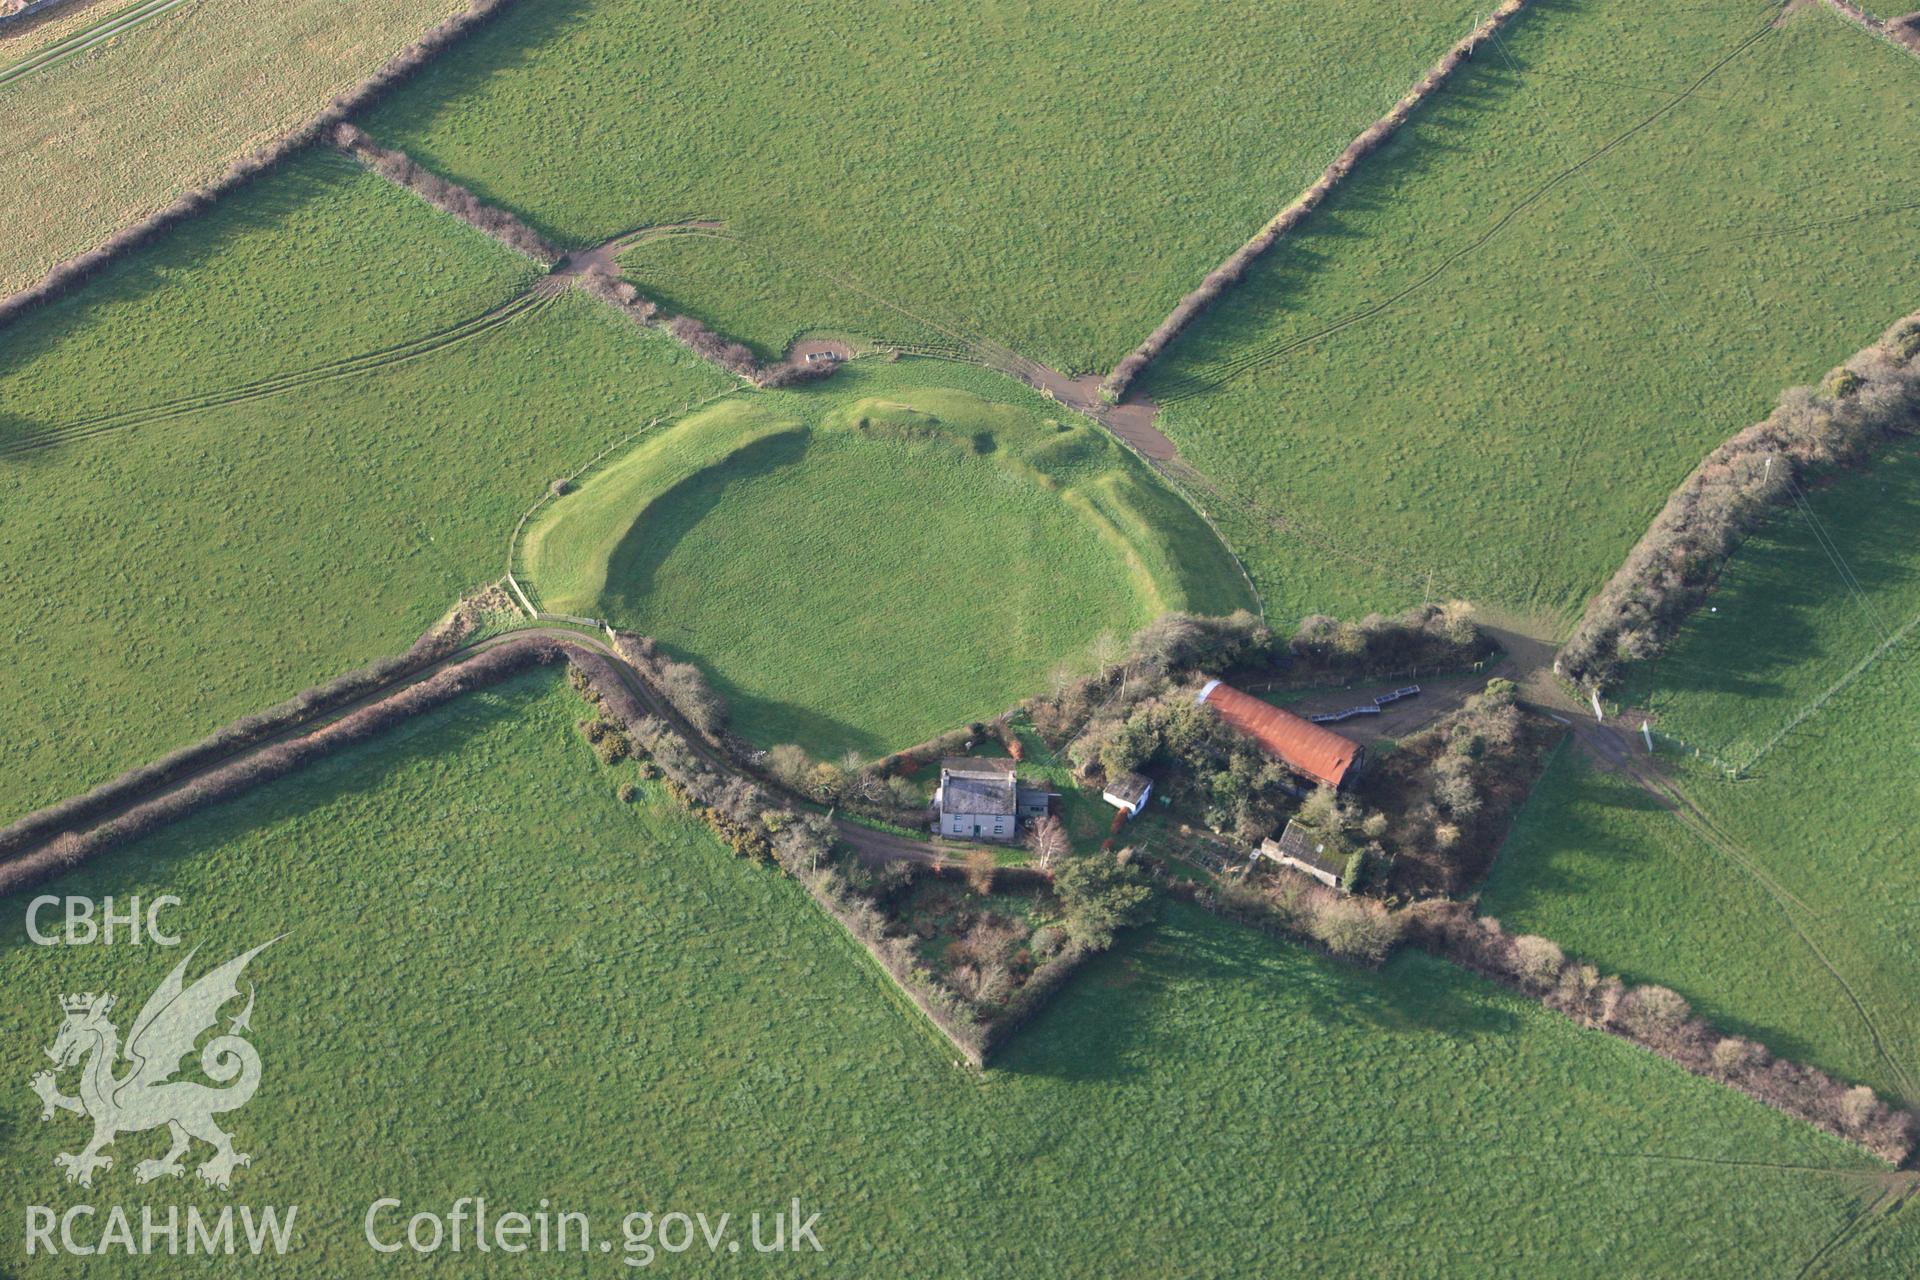 RCAHMW colour oblique photograph of Castell Bryn gwyn, in low winter light. Taken by Toby Driver on 13/01/2012.